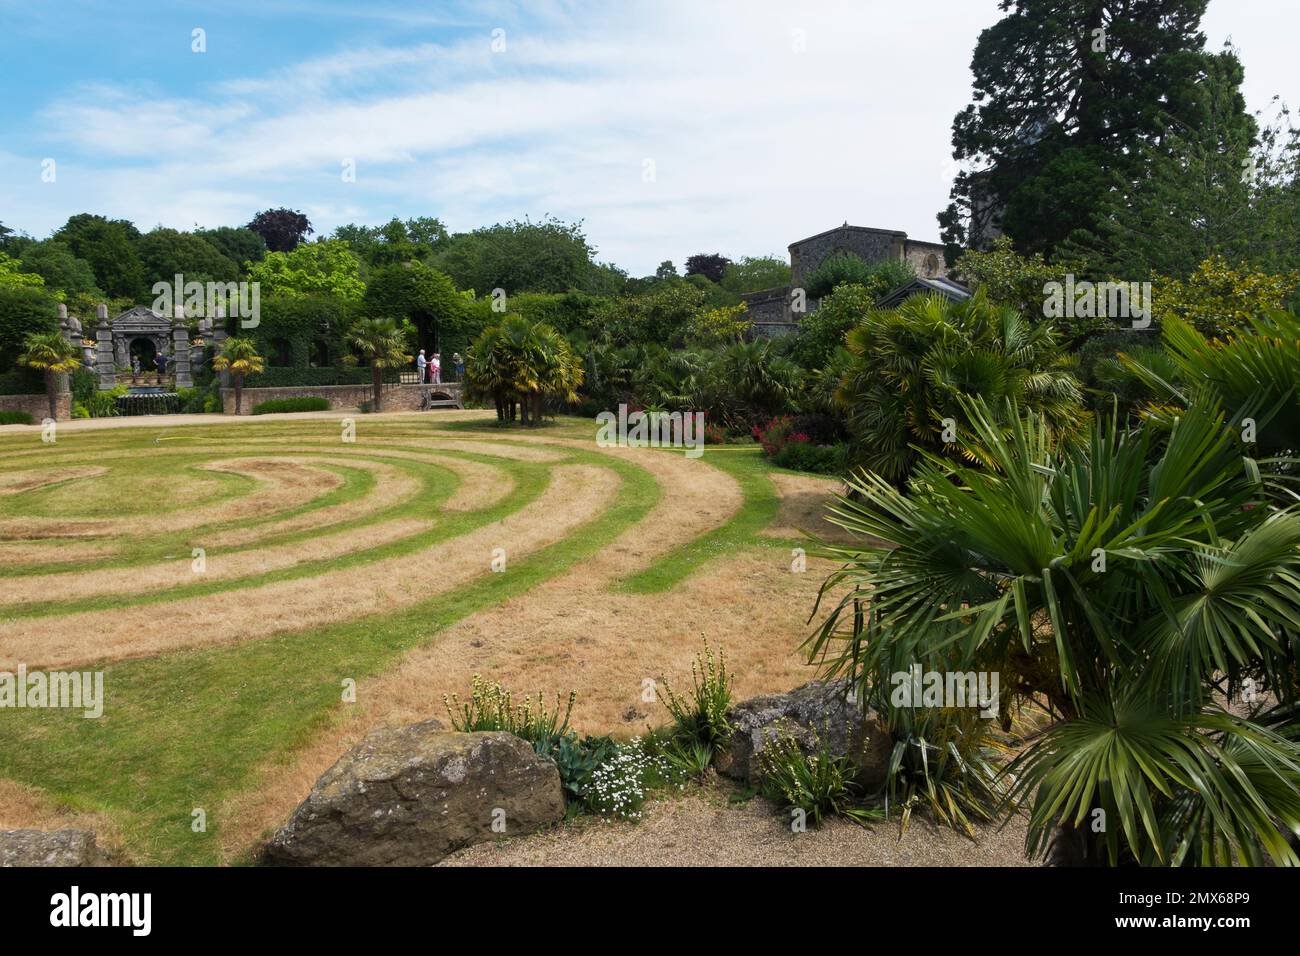 Grass labyrinth with Oberon’s Palace, a structure based on one of Inigo Jones’ set-designs for Prince Henry’s Masque on New Year’s Day 1611, Arundel Stock Photo